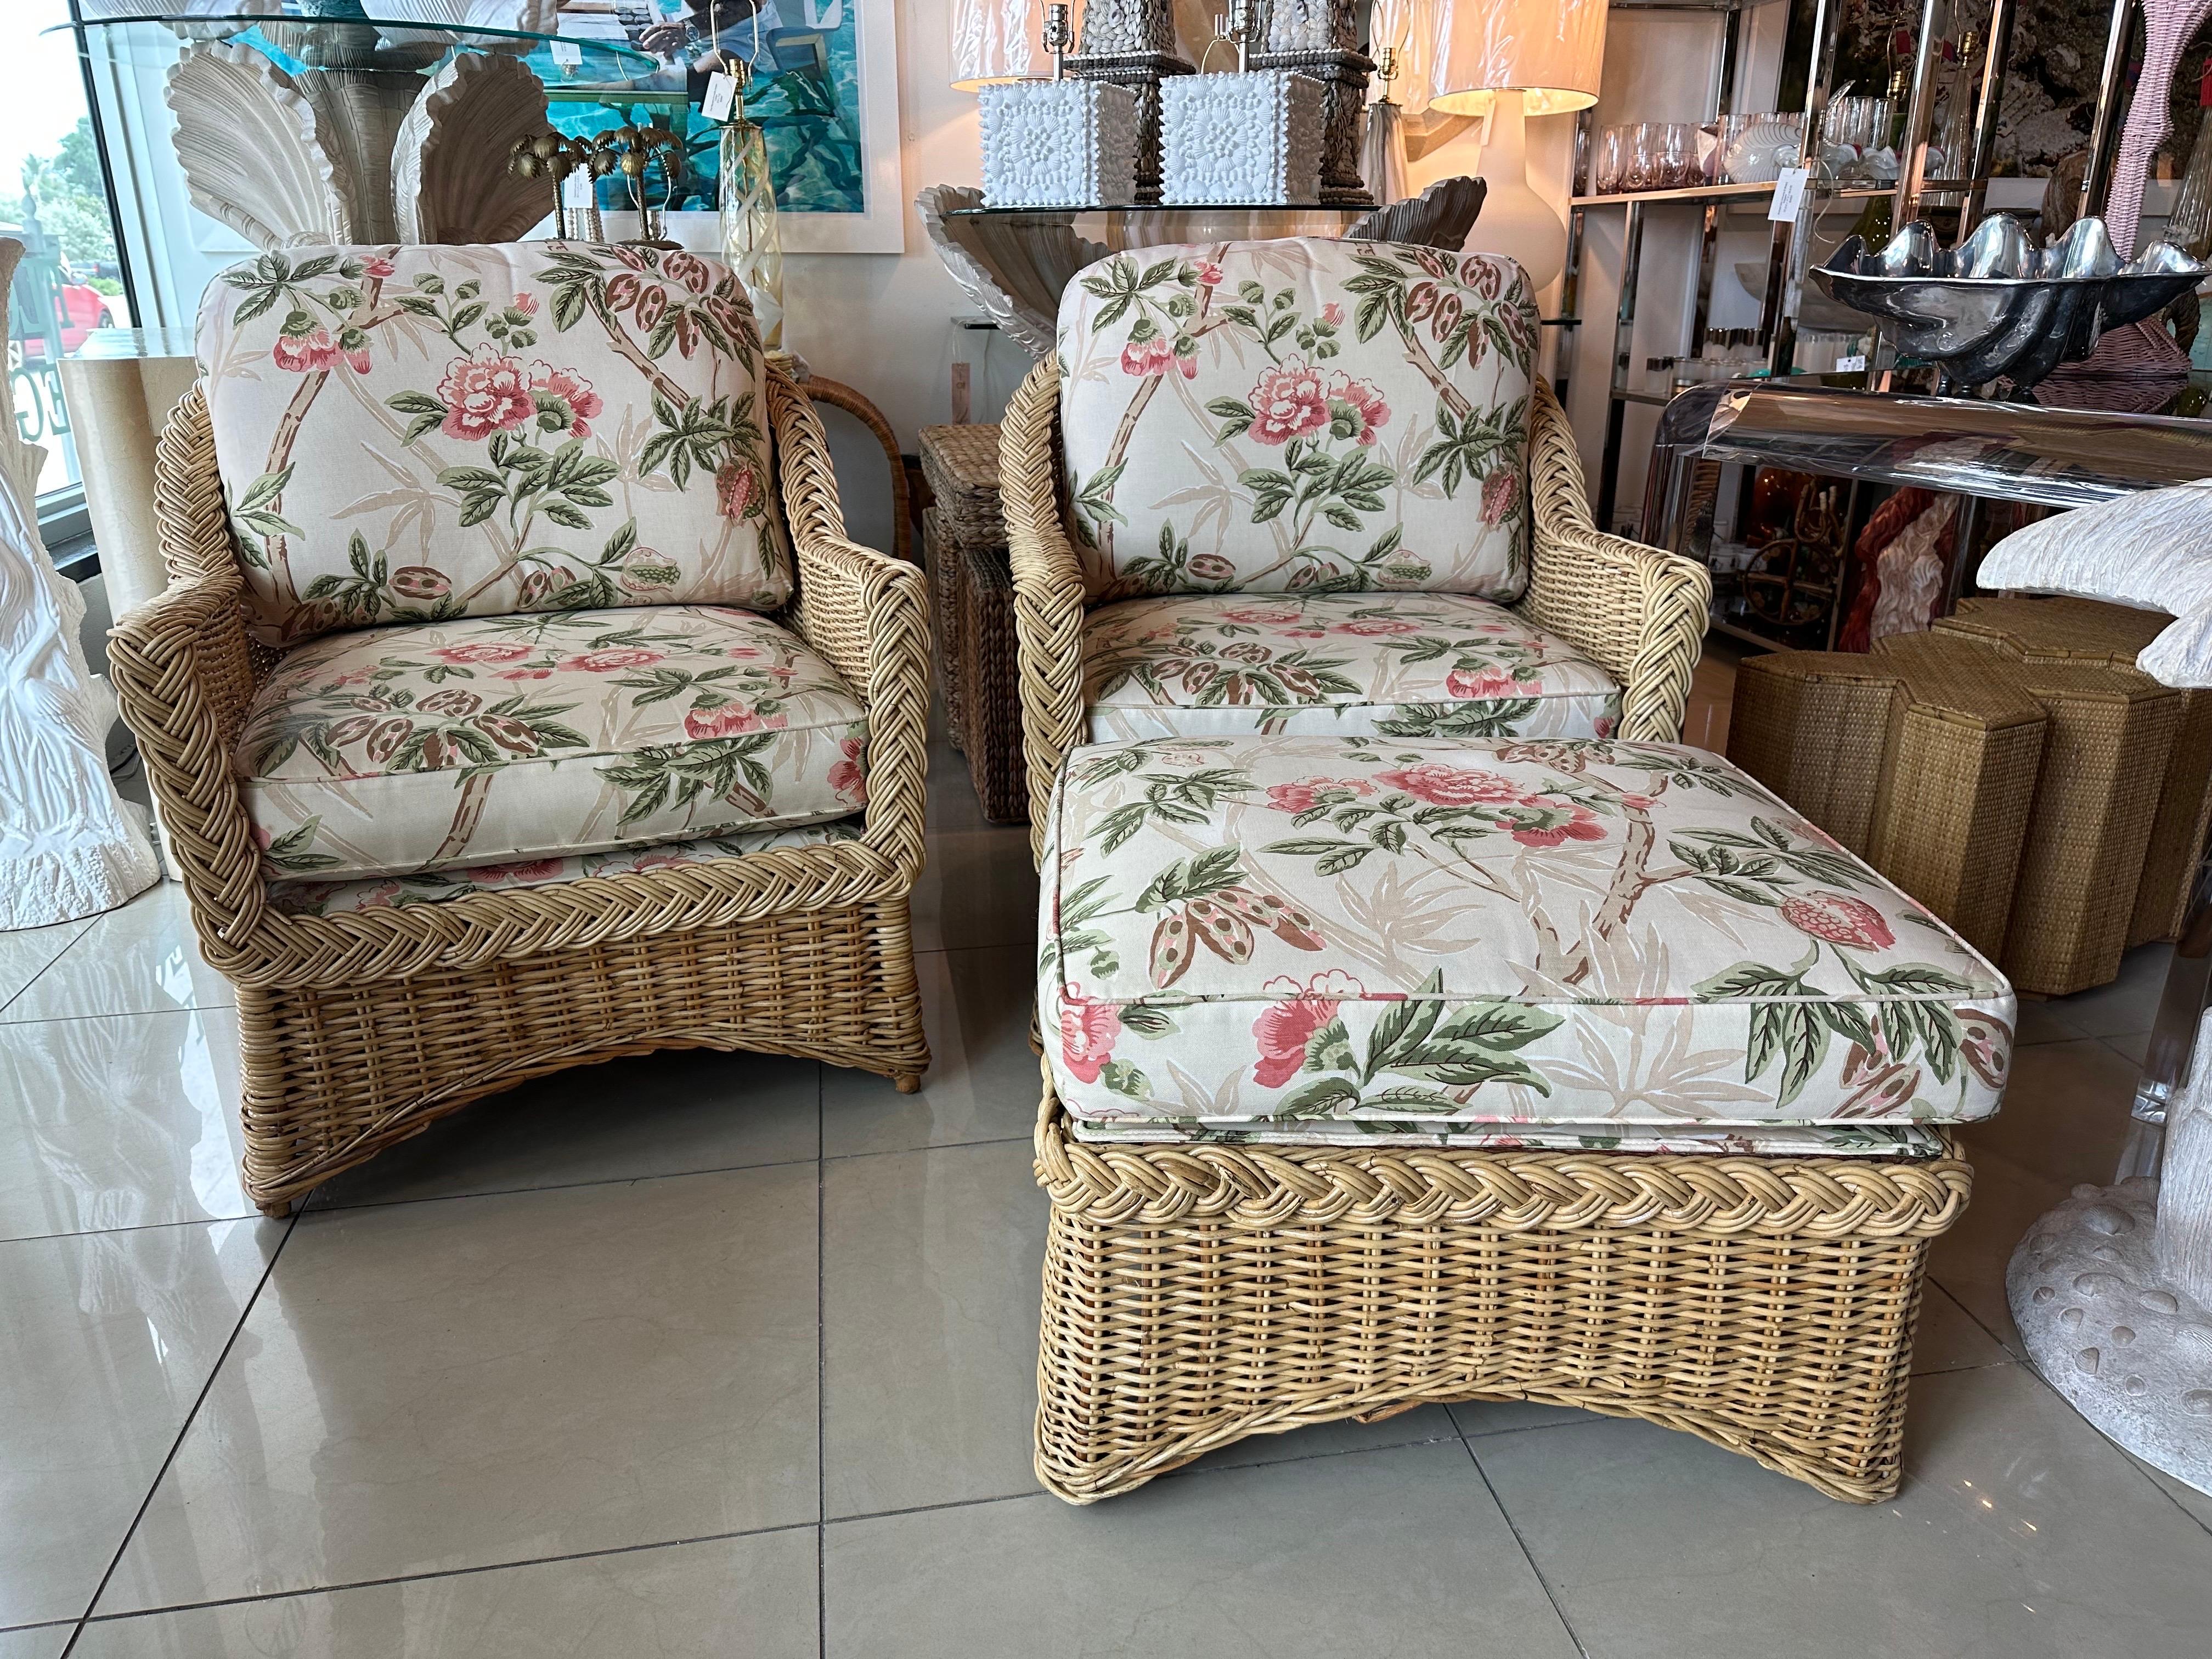 Lovely 3 piece set. Pair of braided wicker rattan lounge club arm chairs and one ottoman. By Wicker Works. No damage to the wicker/rattan. Recently recovered, as found upholstery. Both cushions have zippers. No stains or damage seen but may have